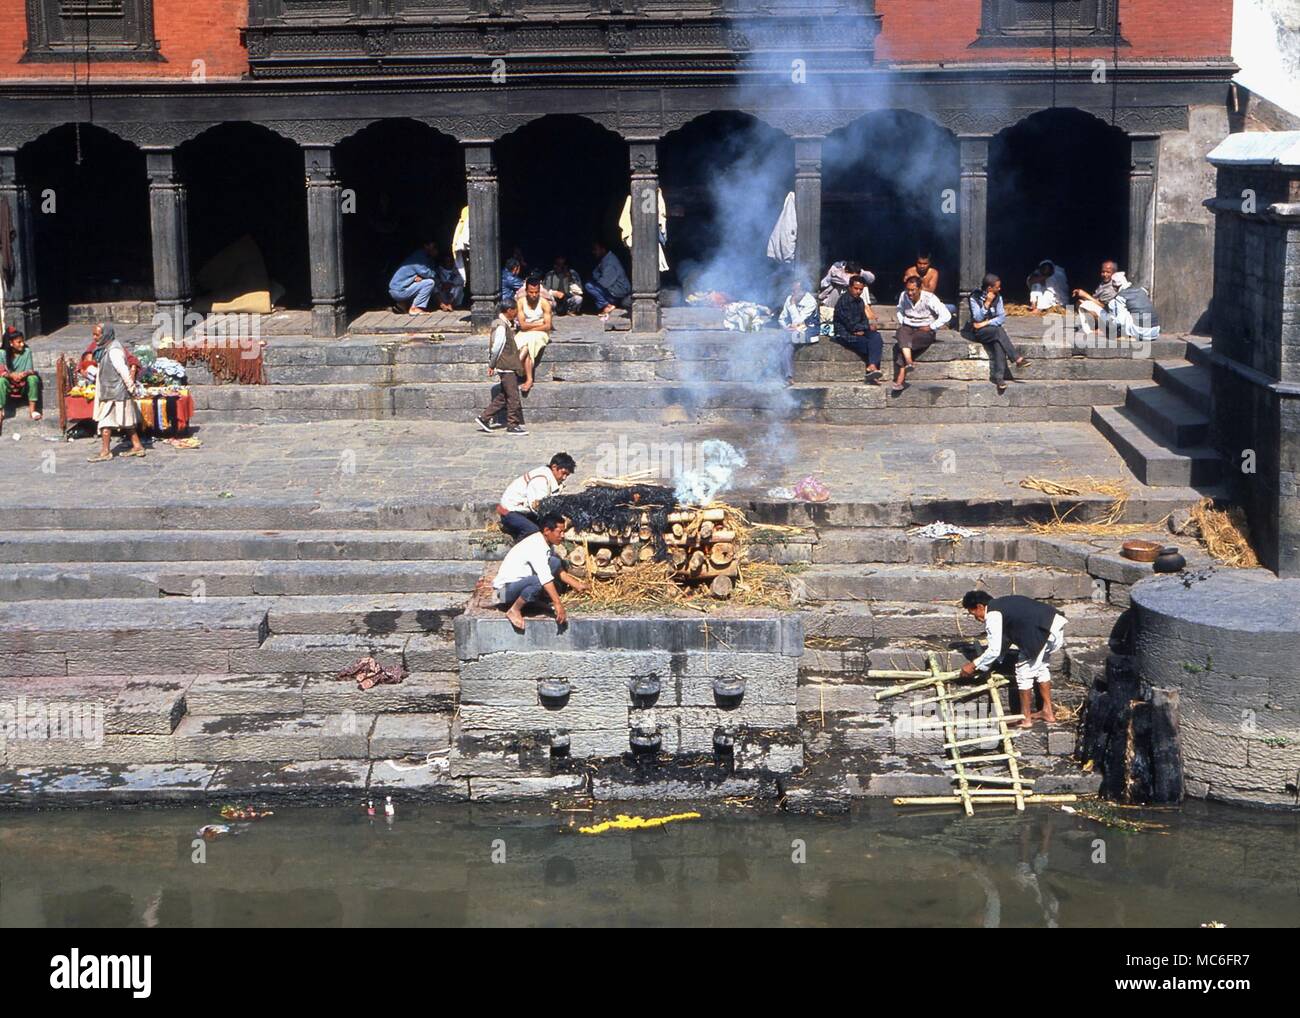 Hindu cremation Cremation of a dead body by the Bagmati river (Kathmandu valley). The corpse, removed of its clothing beneath the straw, is burned. Theshes are then thrown into the river. Stock Photo